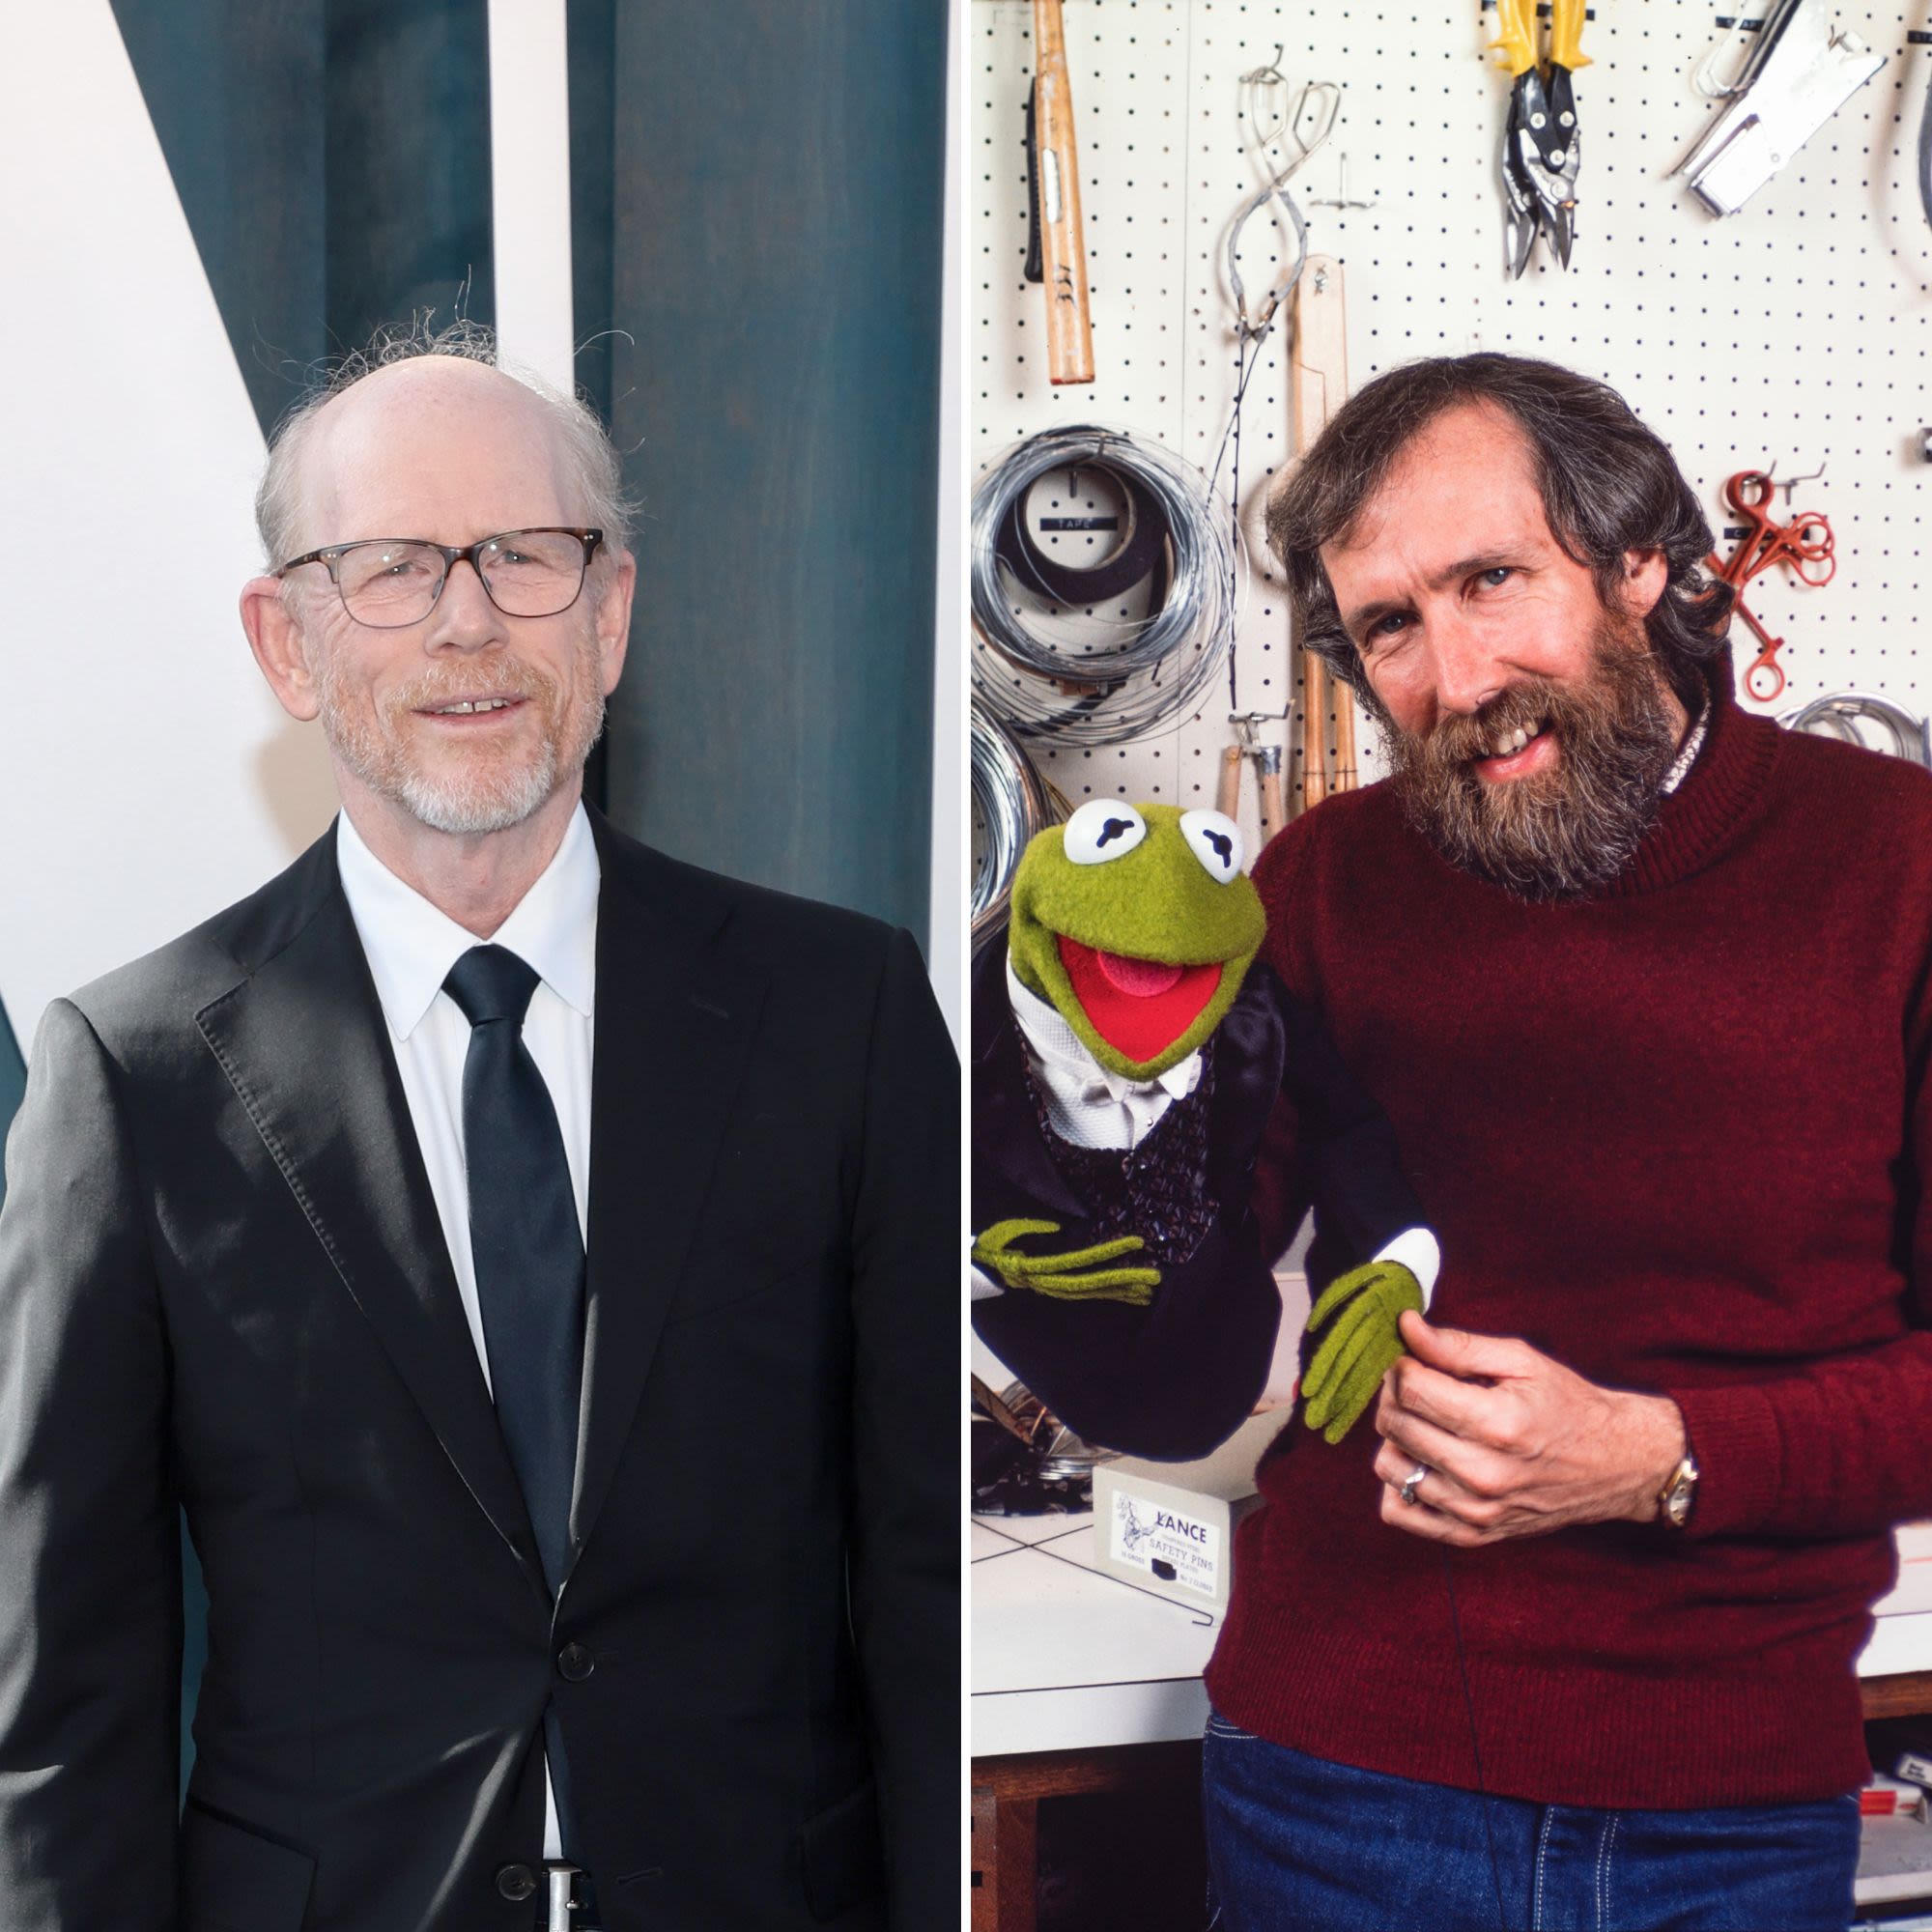 Ron Howard Says Muppets Creator Jim Henson ‘Took a Lot of Risks’: ‘Gambled Time and Resources’